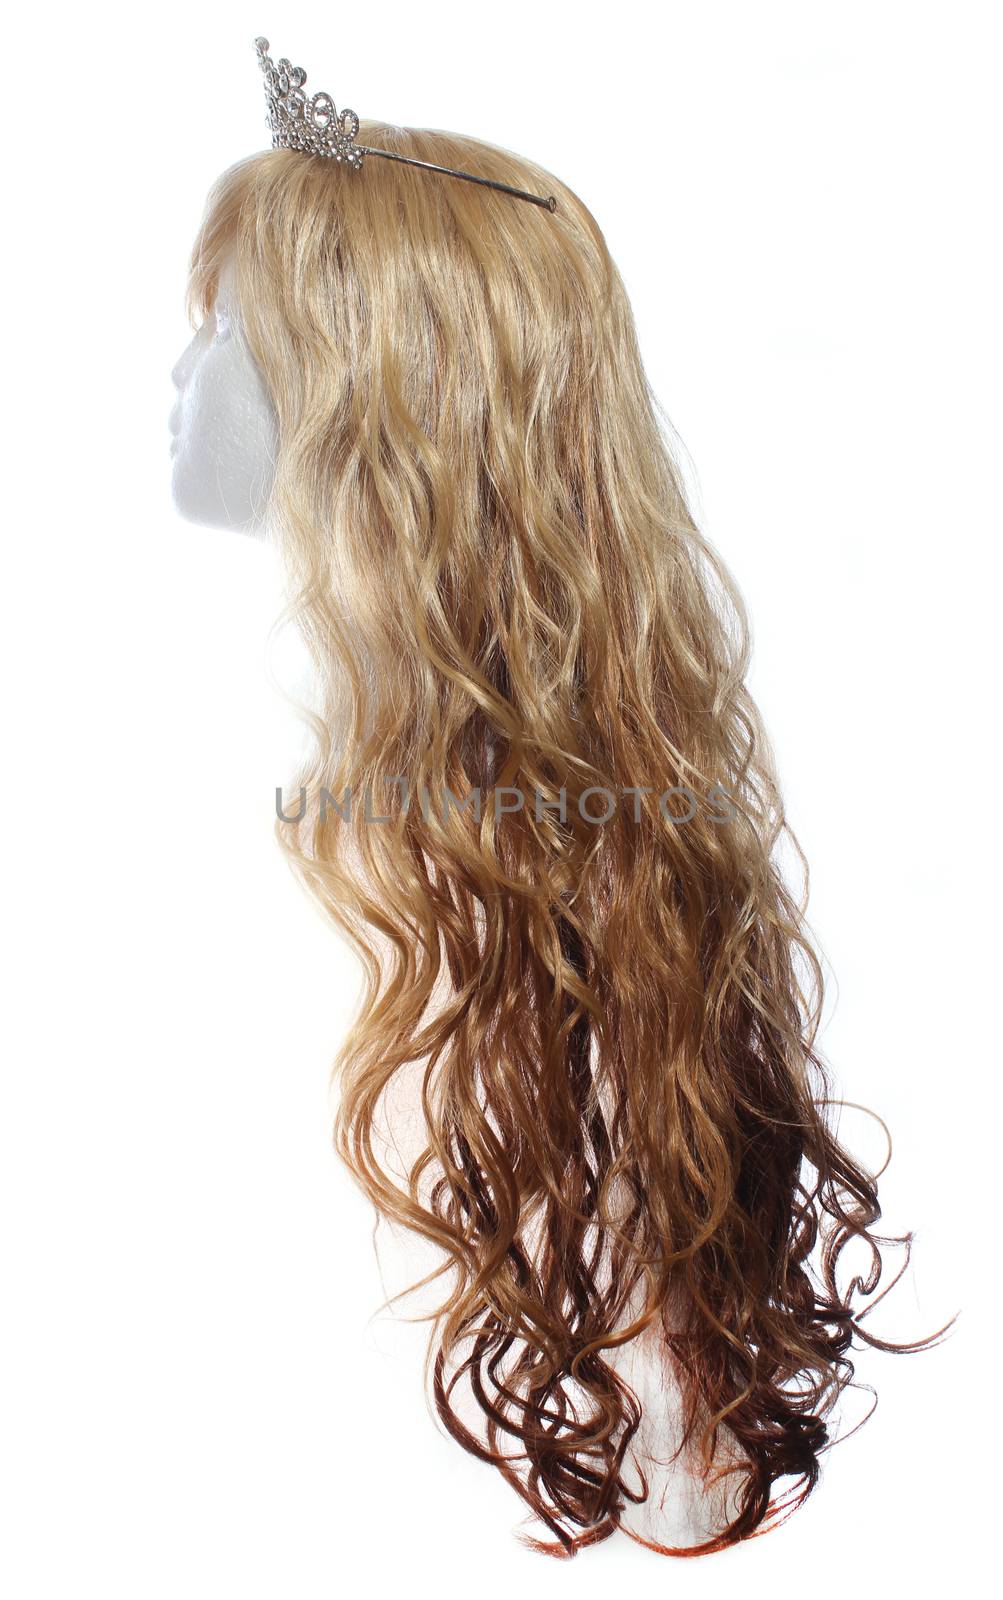 Two Toned Blond Wig on Mannequin Head with tiara by Marti157900